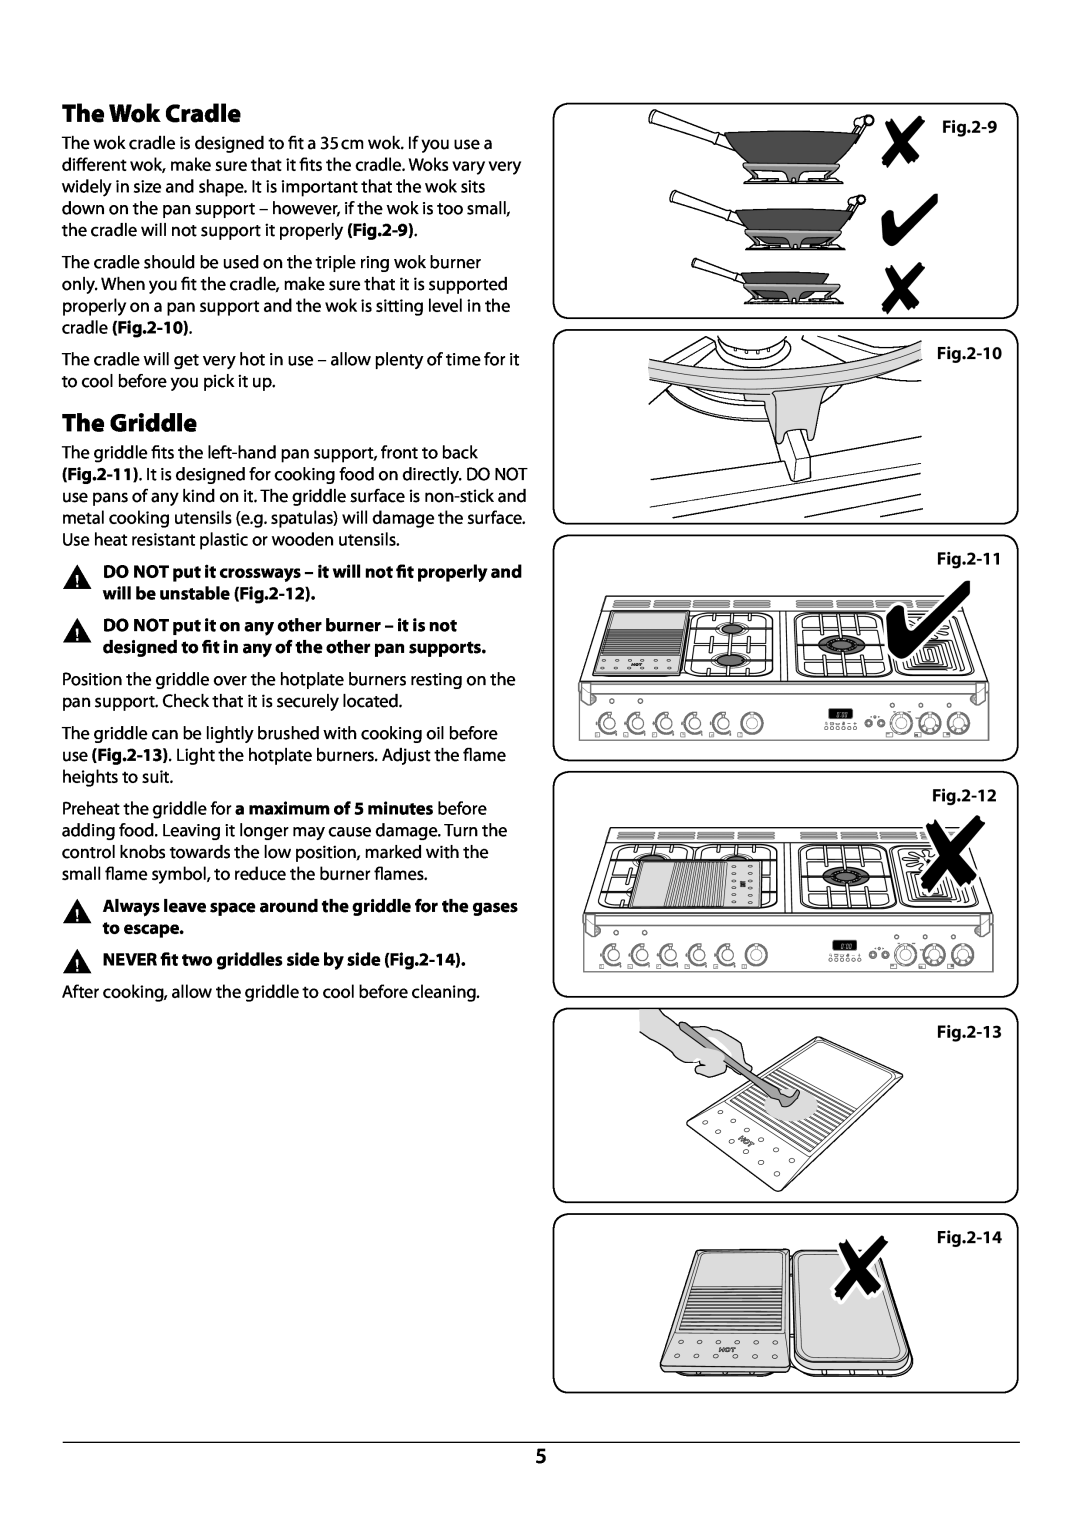 JVC toledo installation instructions DO NOT put it crossways - it will not t properly and, will be unstable -12, 9, 11 -12 